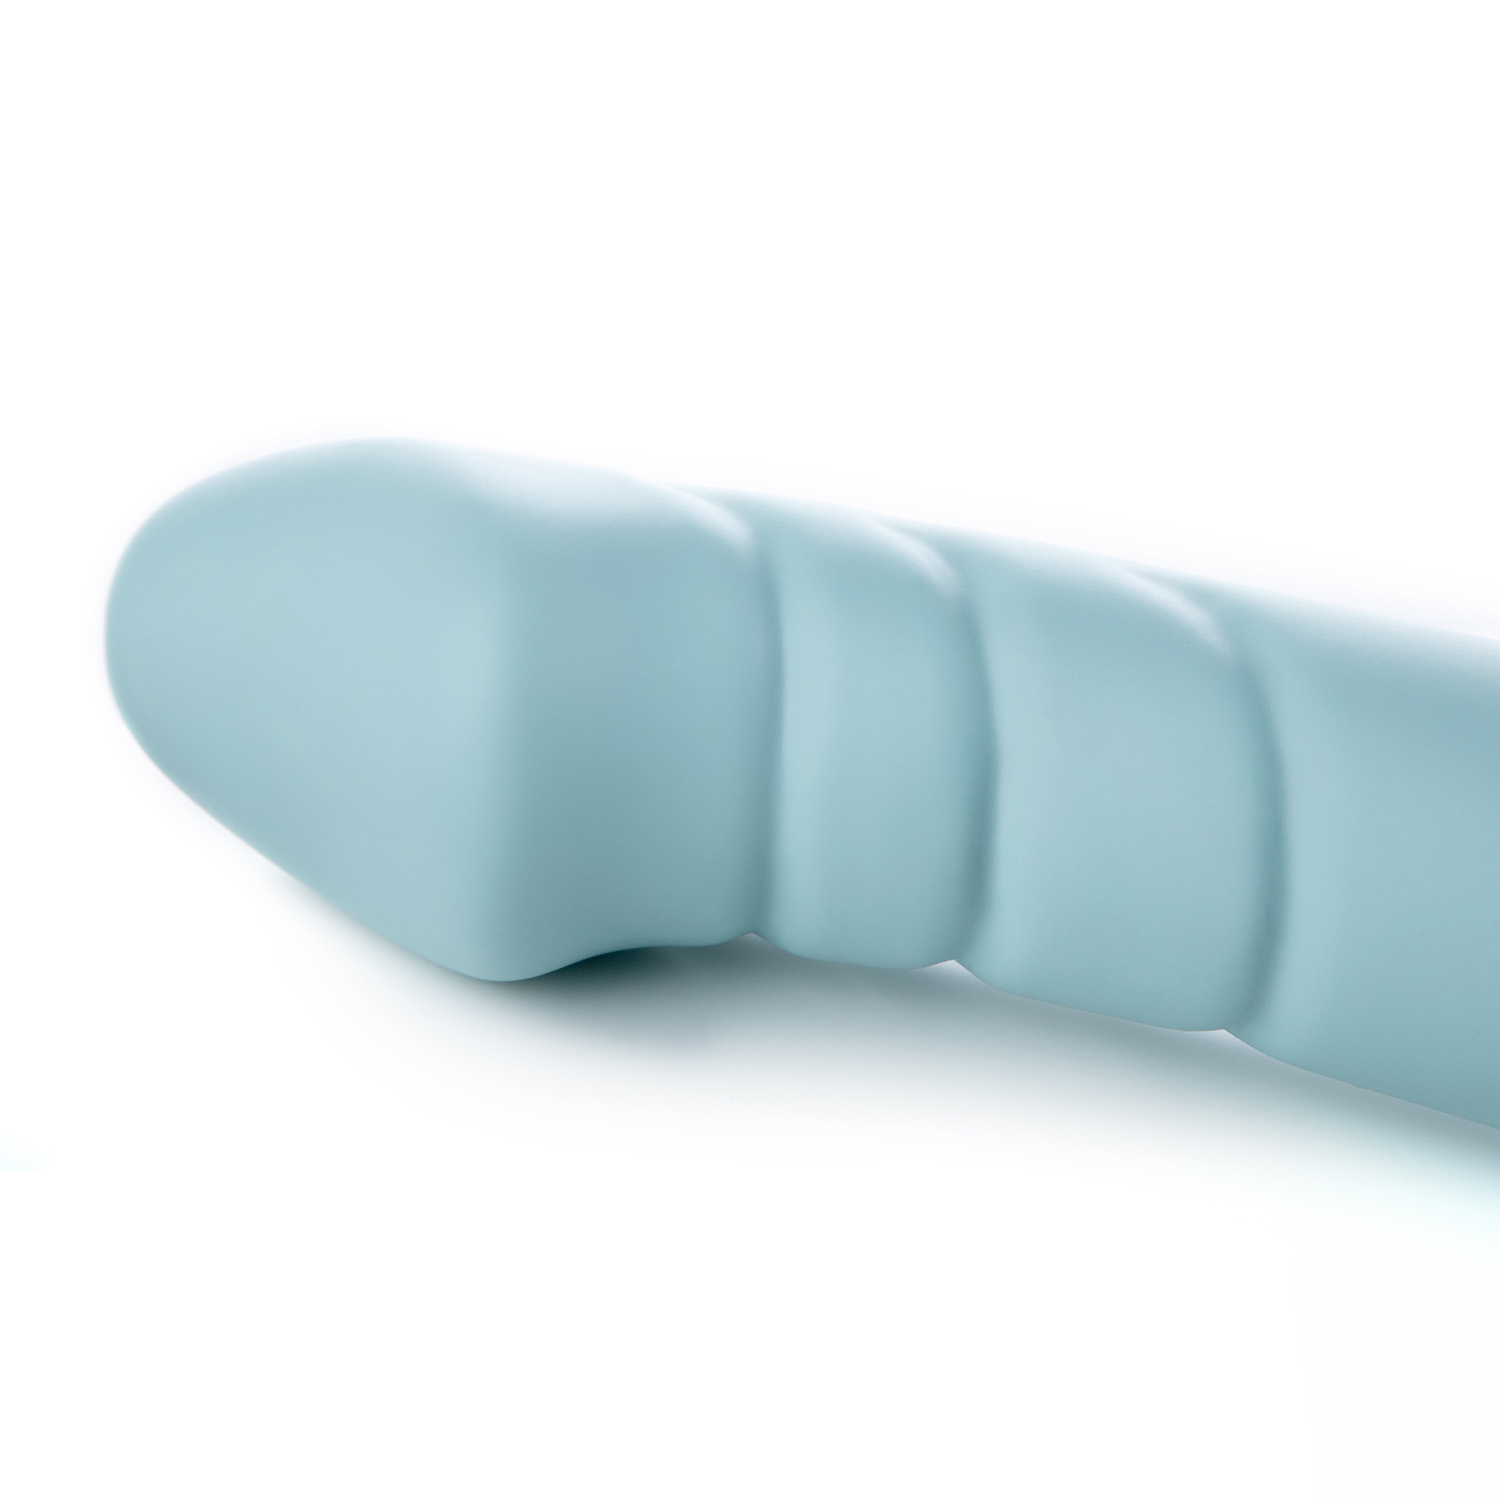 DEVOTION DOUBLE-ENDED STRAP-ON DILDO IN BLUE